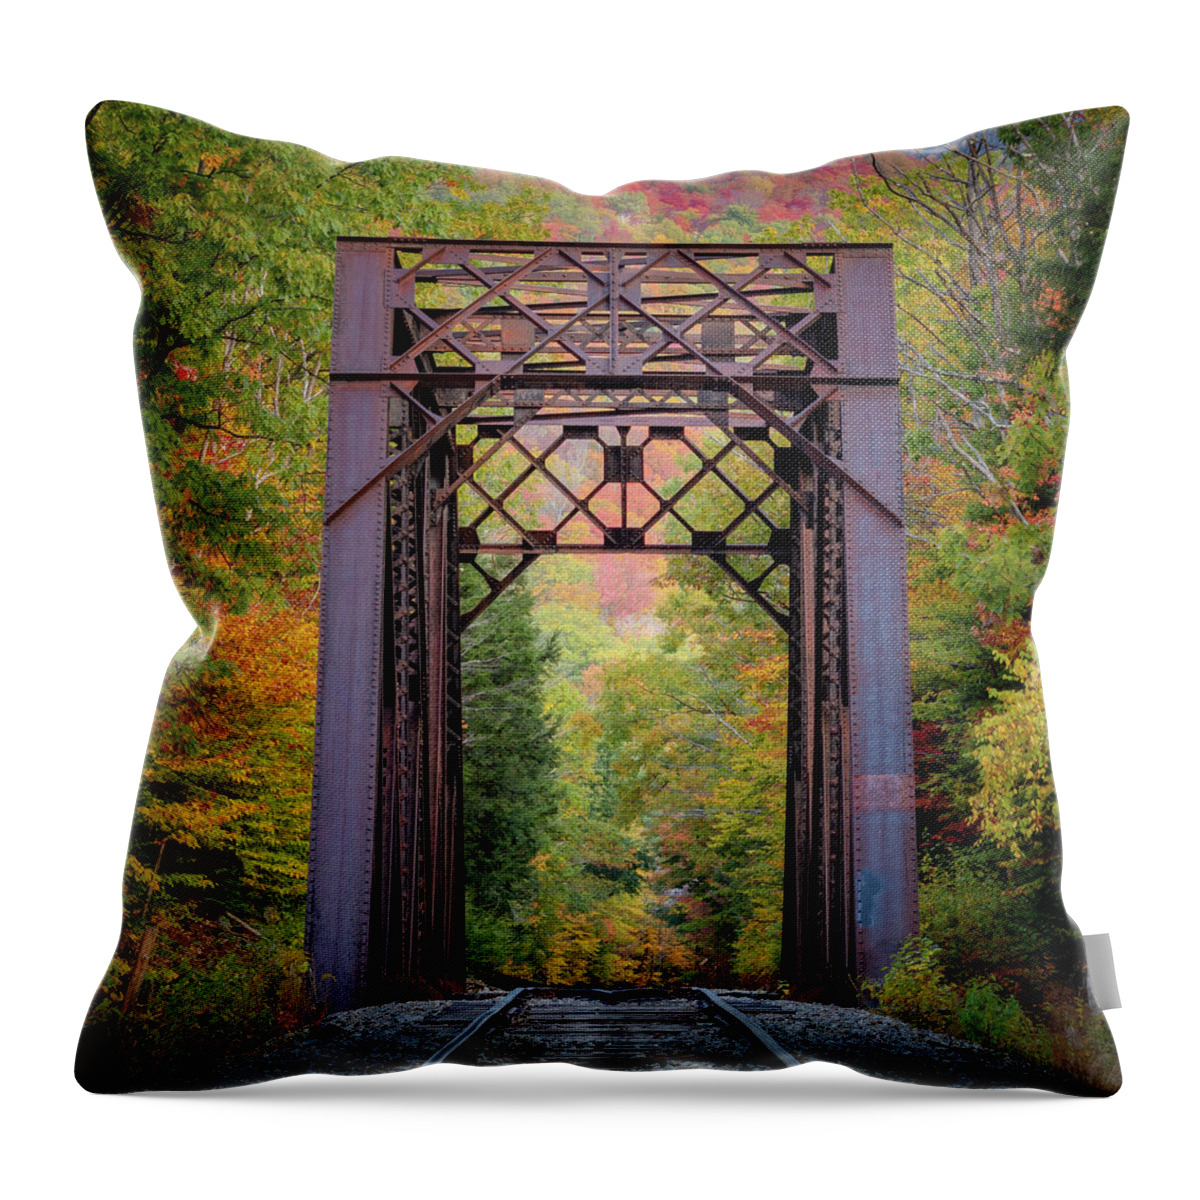 Train Tracks Throw Pillow featuring the photograph Goast Tracks by William Bretton